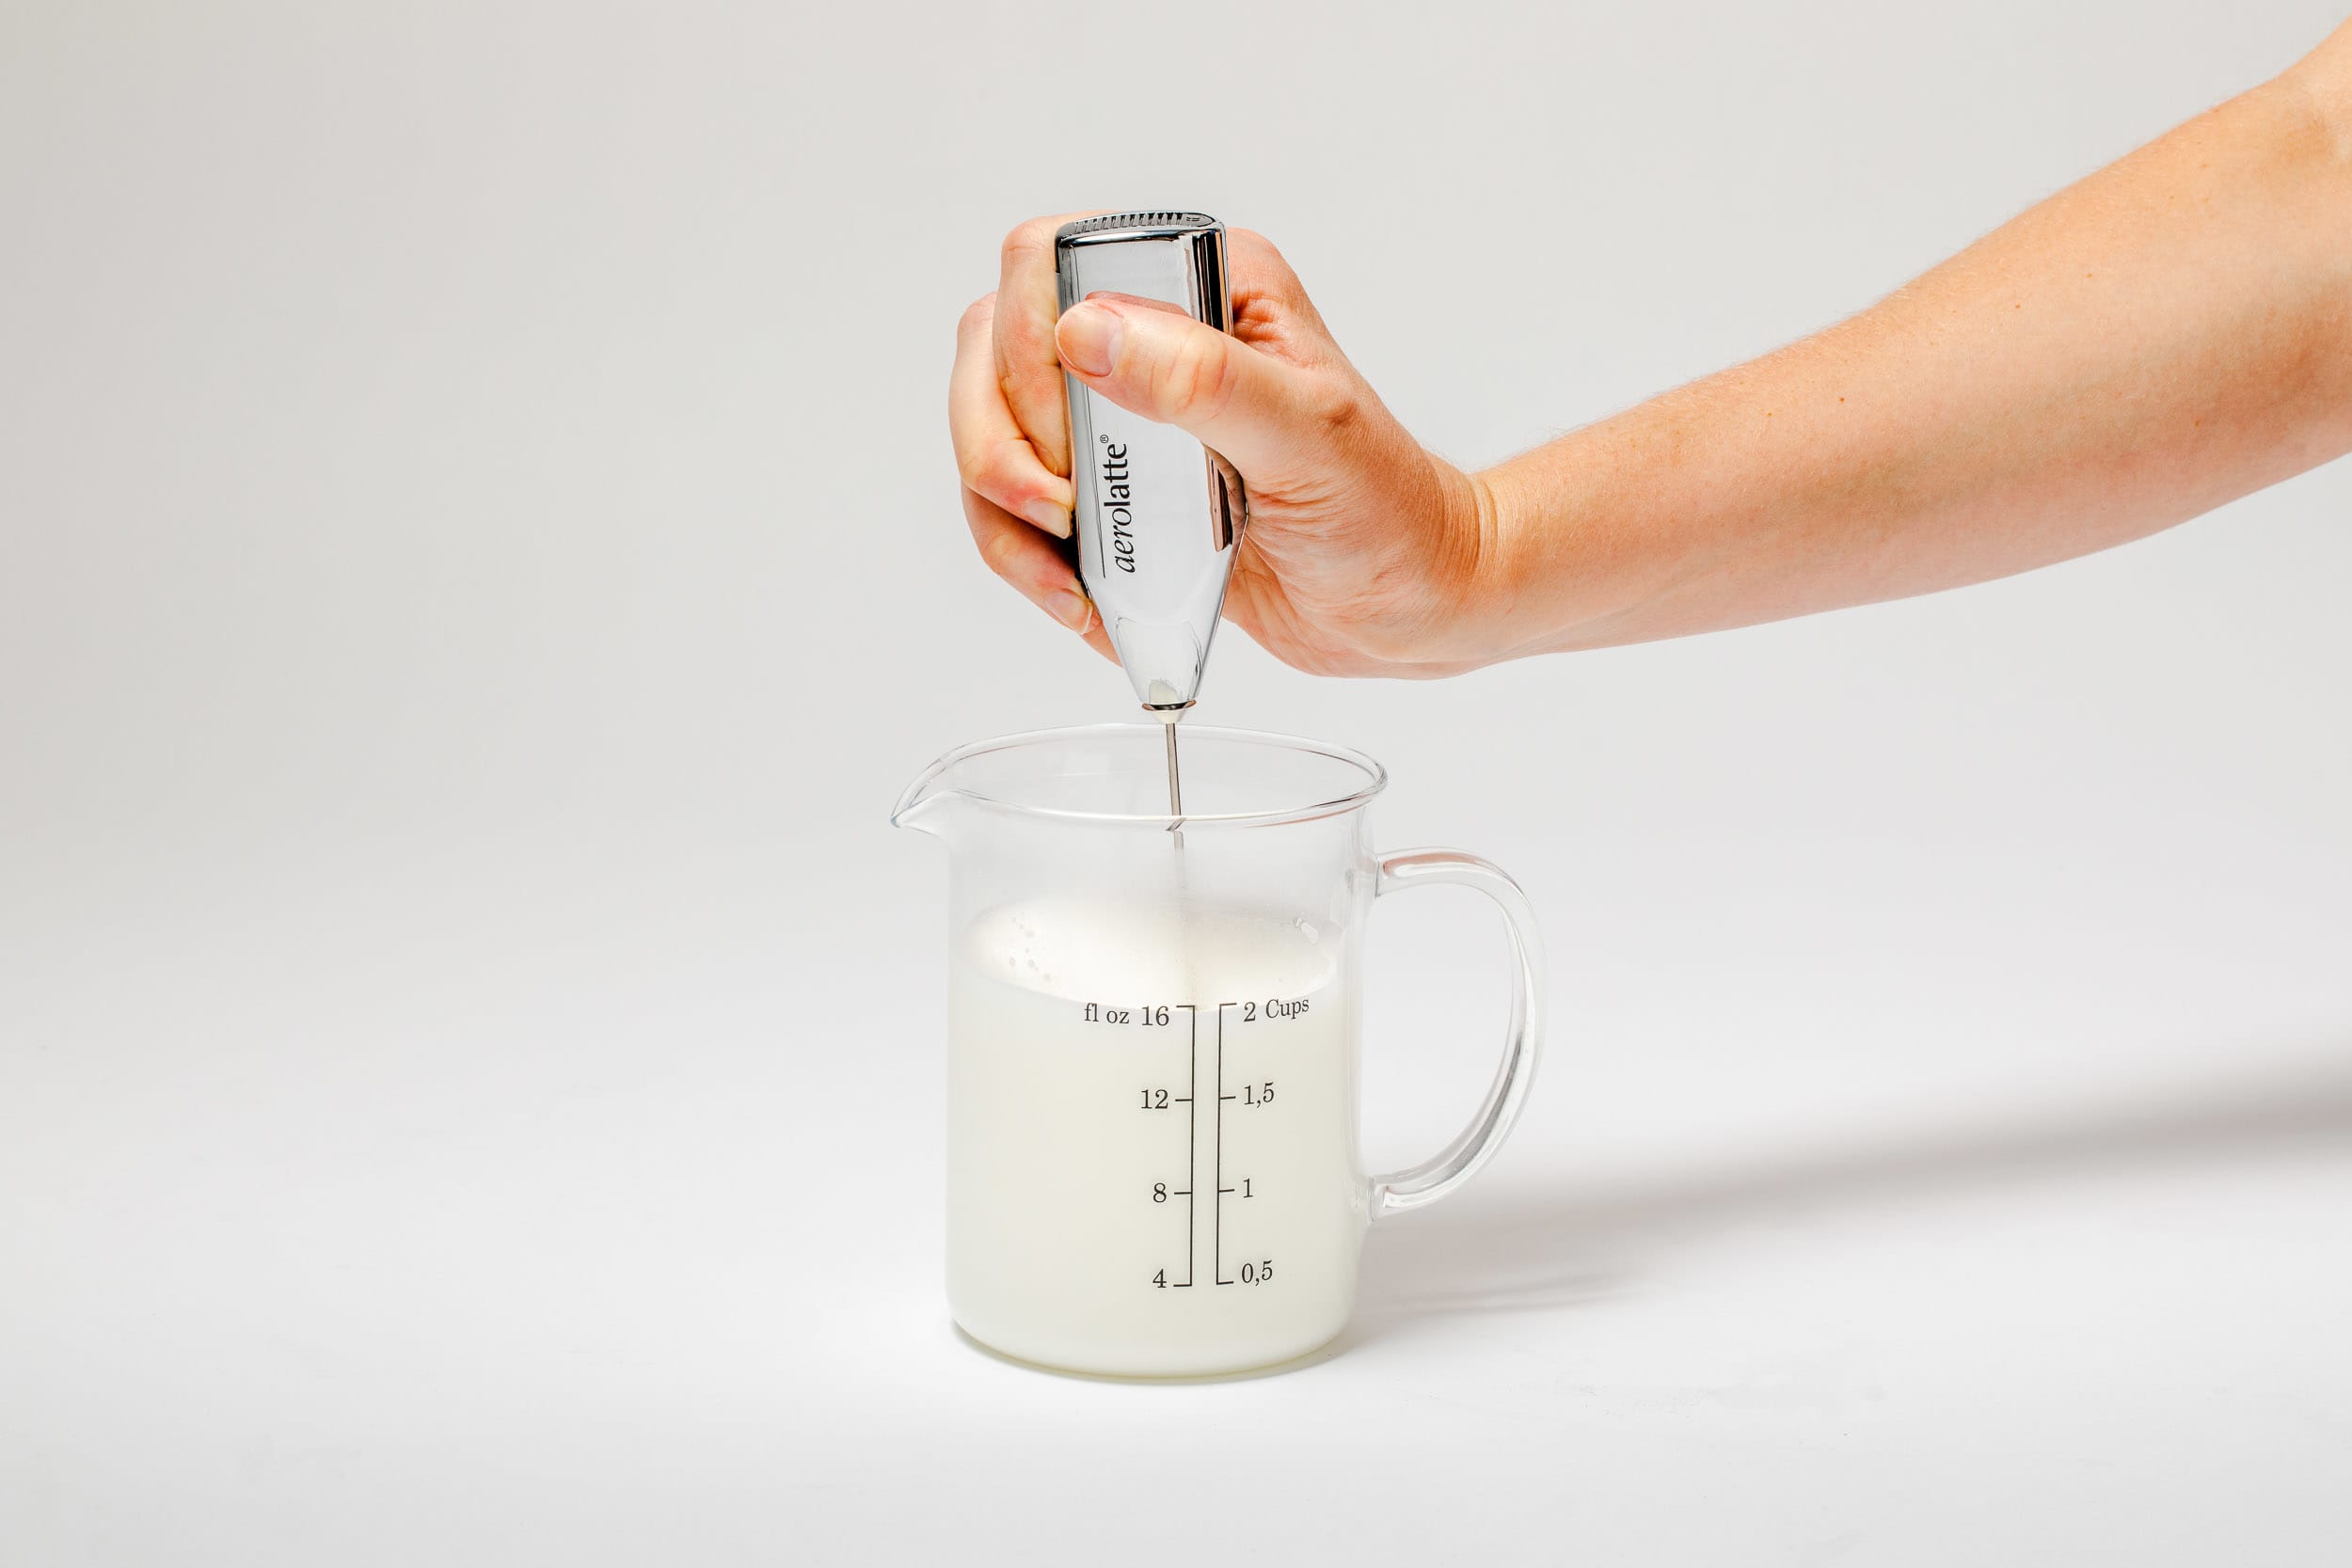 Aerolatte Handheld Milk Frother Review: a Foolproof Kitchen Tool